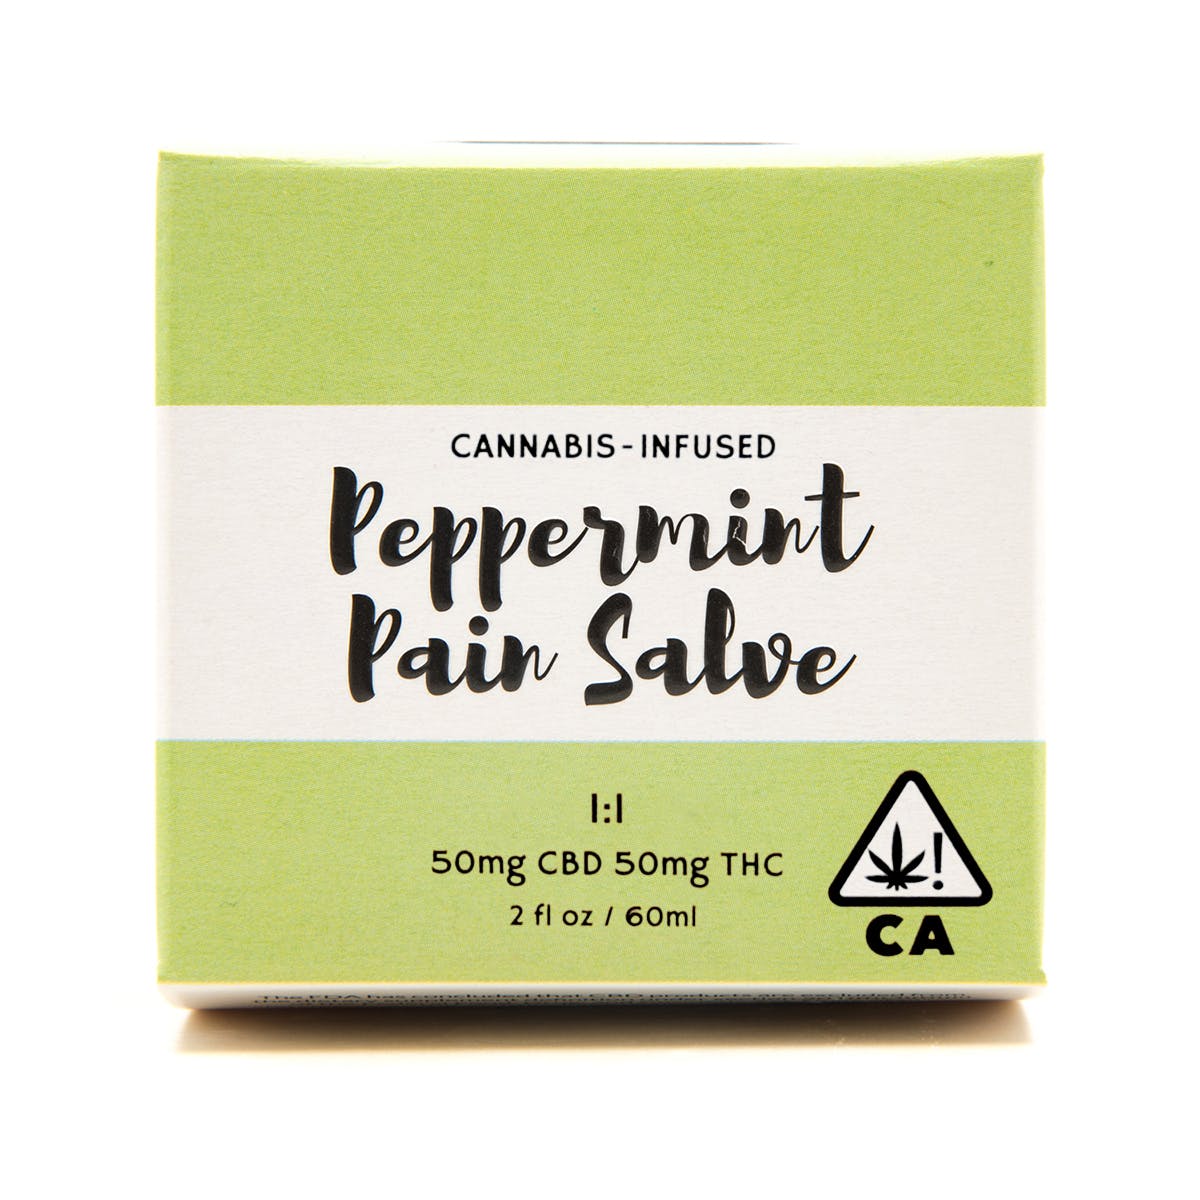 marijuana-dispensaries-city-compassionate-caregivers-ccc-in-los-angeles-cannabis-infused-peppermint-pain-salve-11